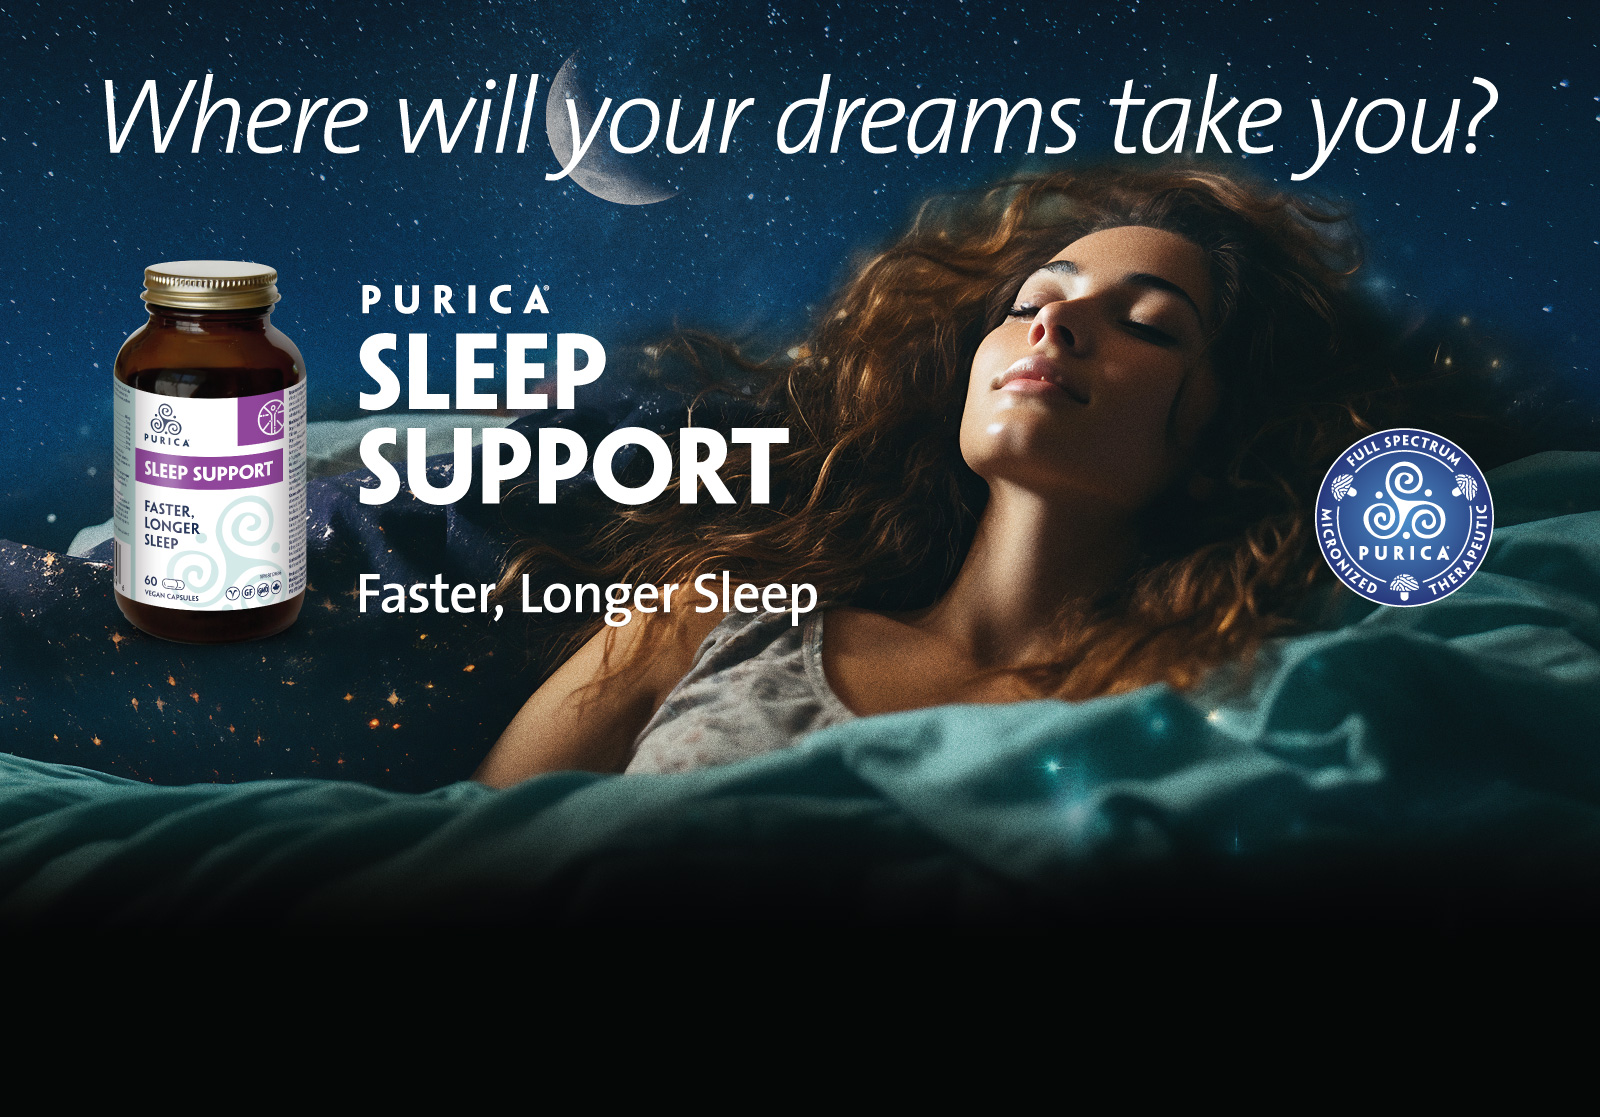 Purica Sleep Support. Where will your dreams take you? A woman sleeping.